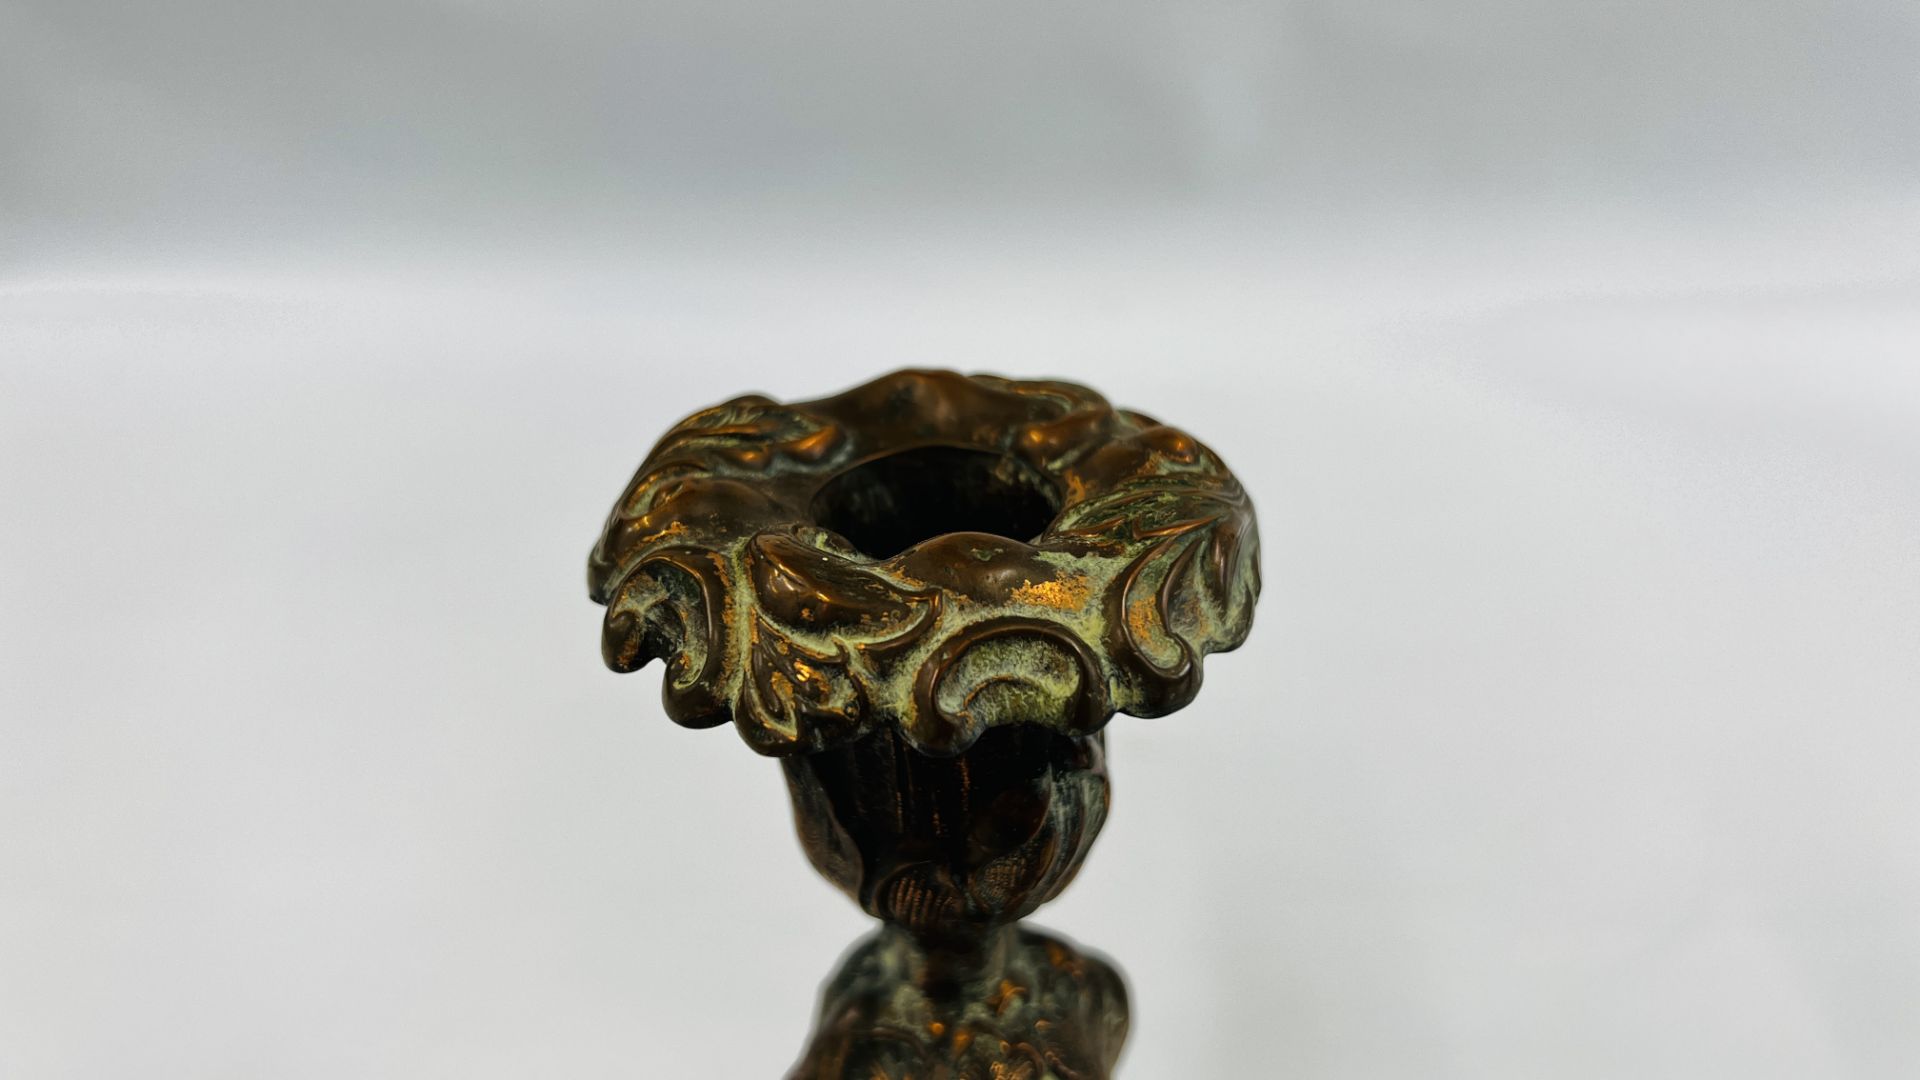 A PAIR OF ORNATE C19TH COPPER CANDLESTICKS WITH DETACHABLE SCONCES - HEIGHT 27CM. - Image 3 of 20